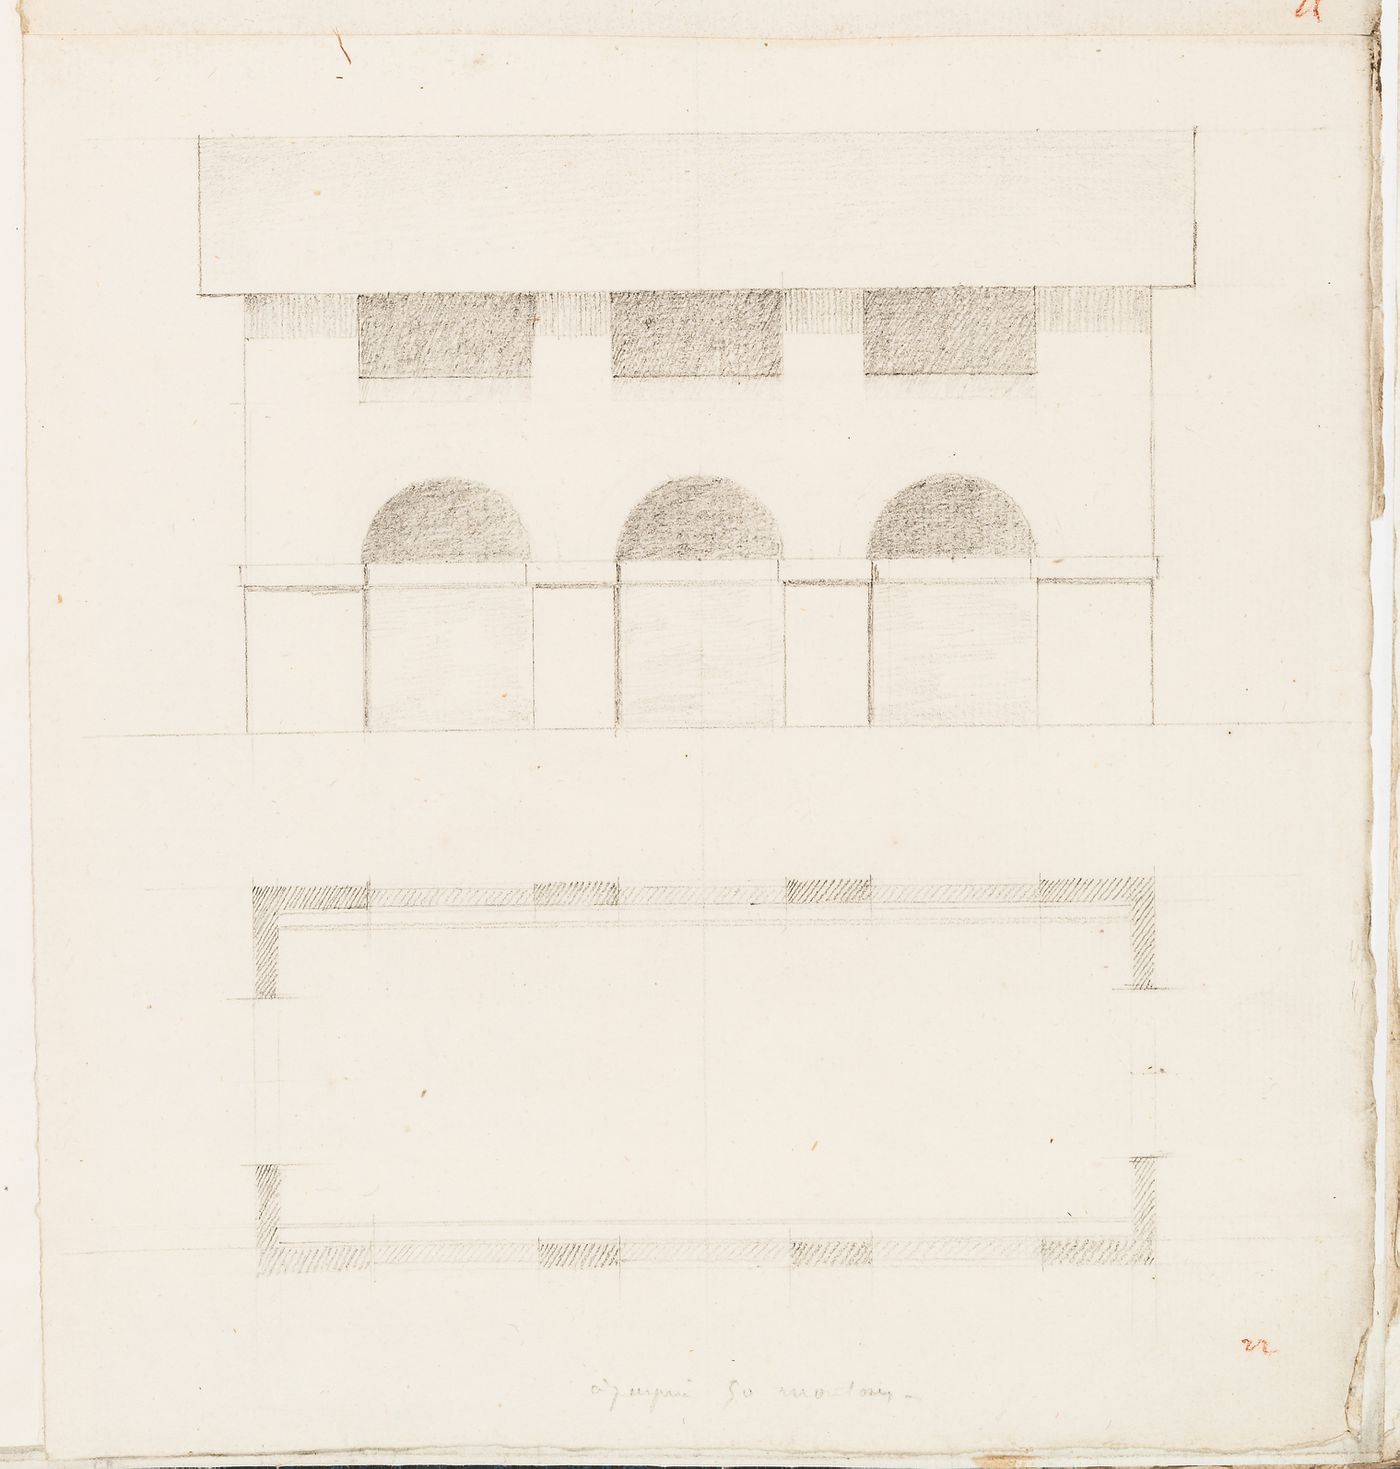 Elevation and plan, probably for an outbuilding, Domaine de La Vallée; verso: Plan for an unidentified building